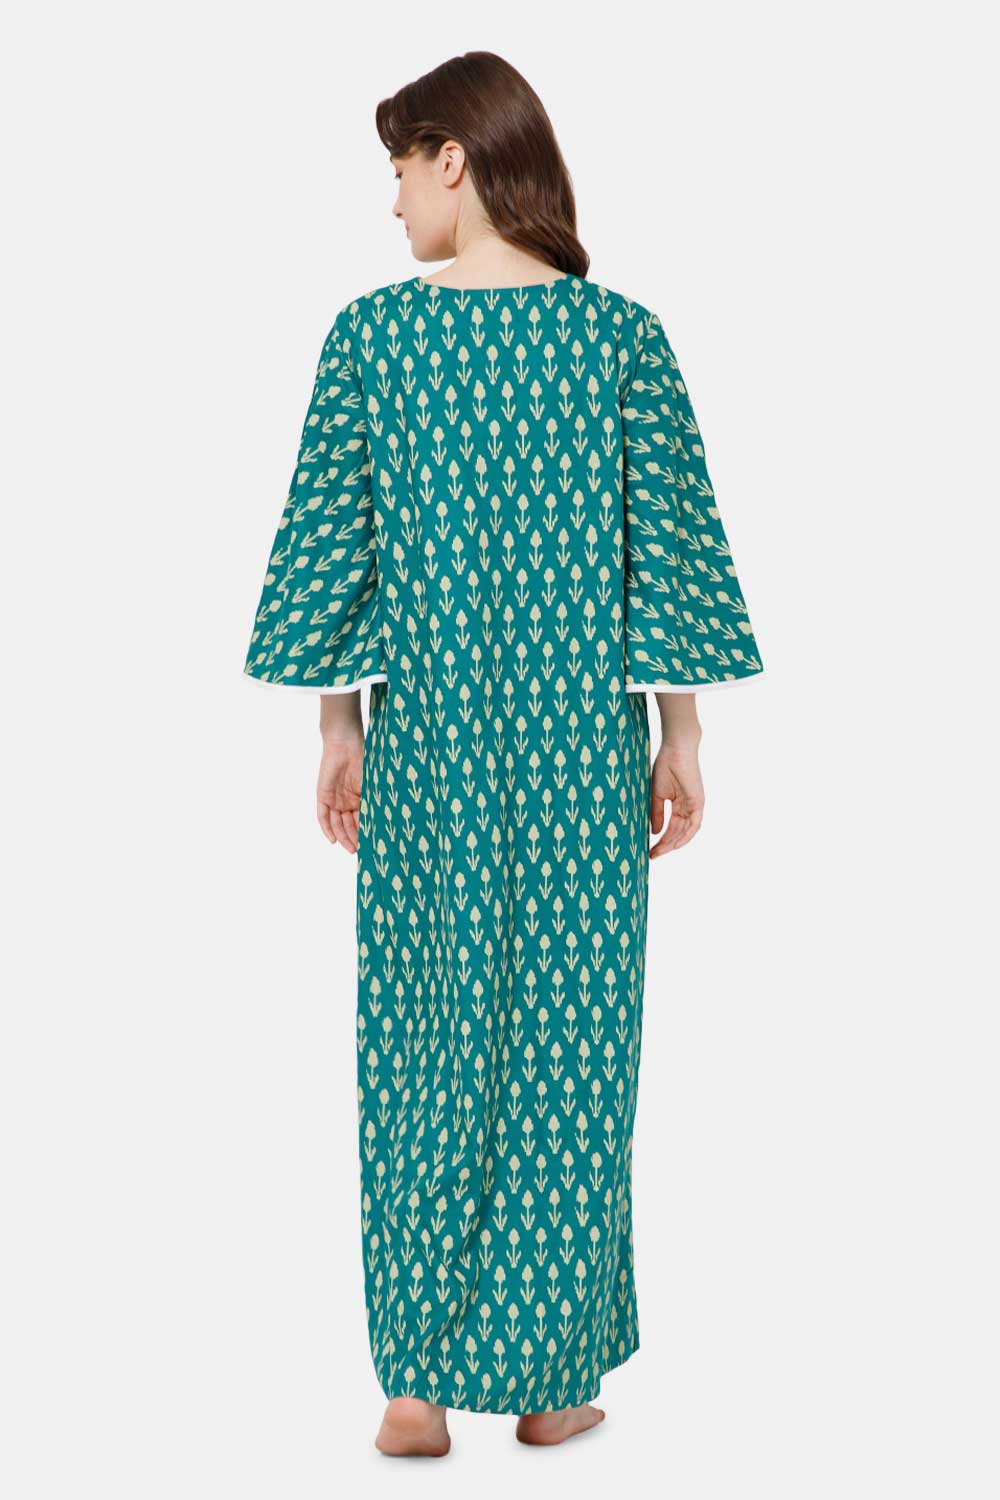 Naidu Hall V Neck Printed Nighty with Long Bell Sleeves - Teal green - NT40